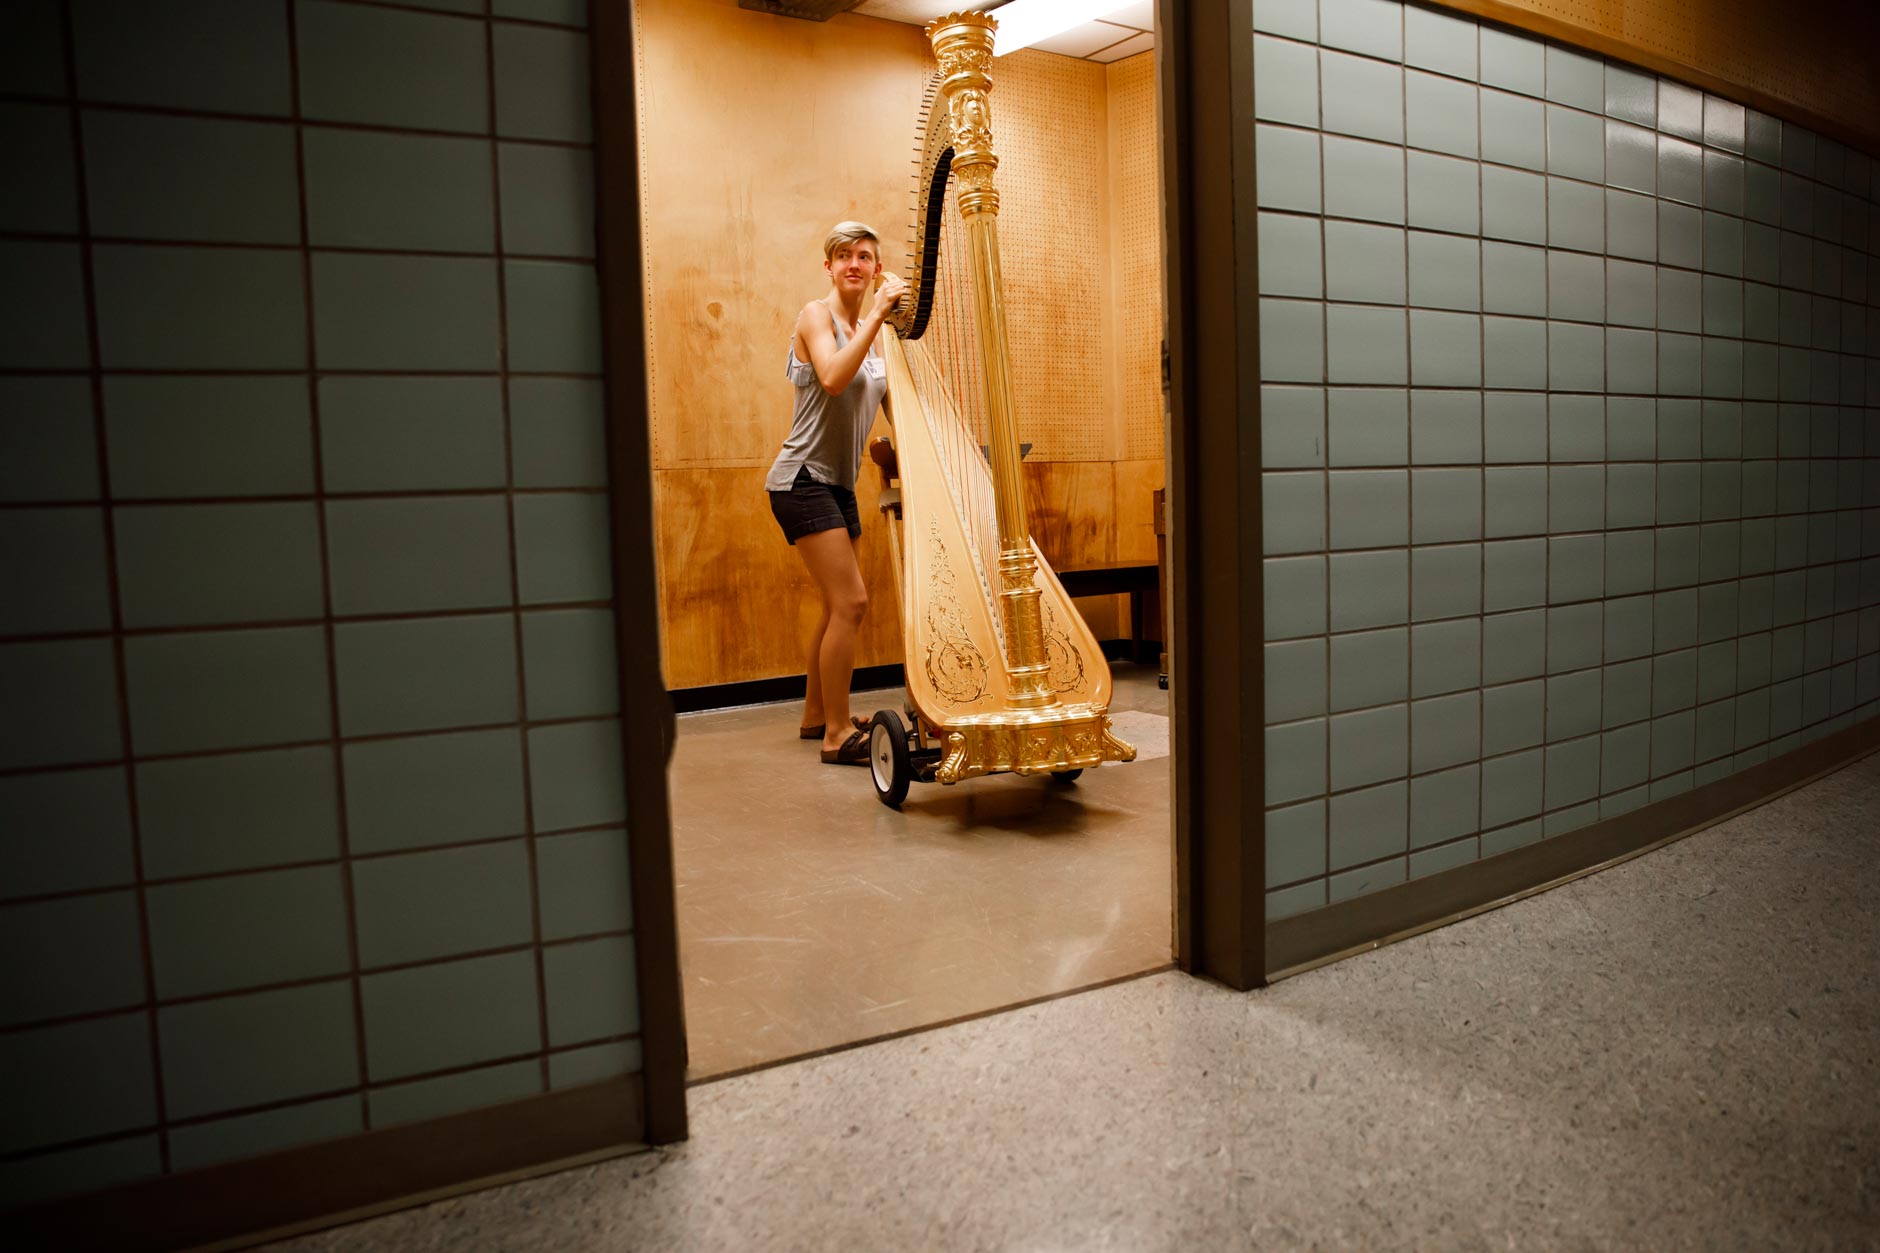 Volunteer Chelsea Balmer moves a harp from a practice room during the 11th USA International Harp Competition at Indiana University in Bloomington, Indiana on Wednesday, July 3, 2019. (Photo by James Brosher)